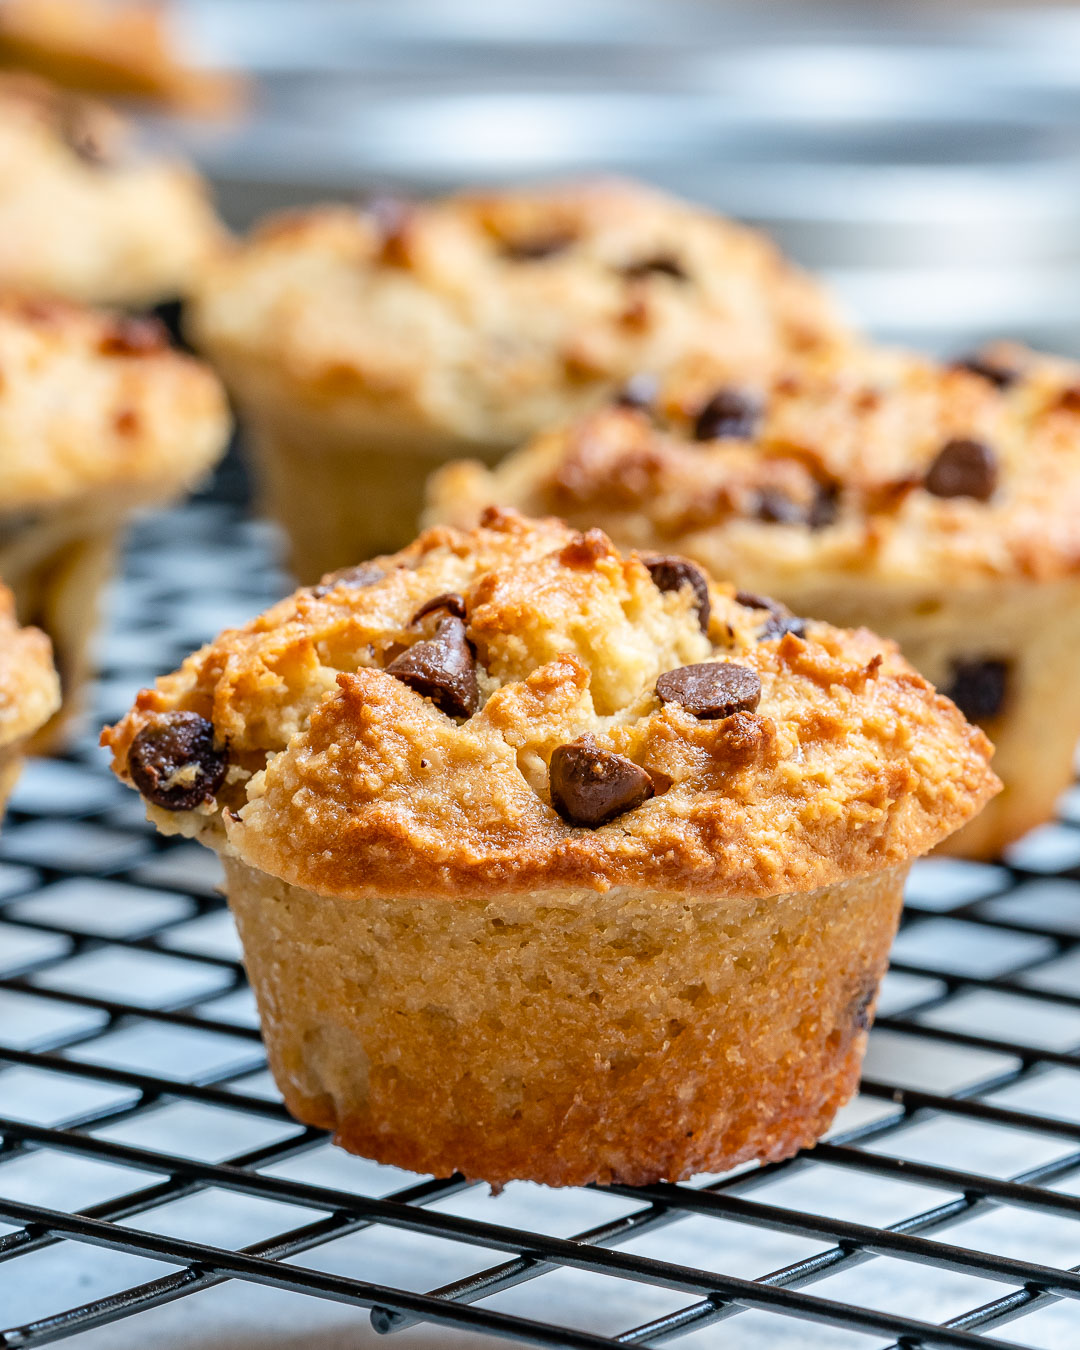 This Recipe for Gluten-Free Mini Chocolate Chip Muffins is a Winner!